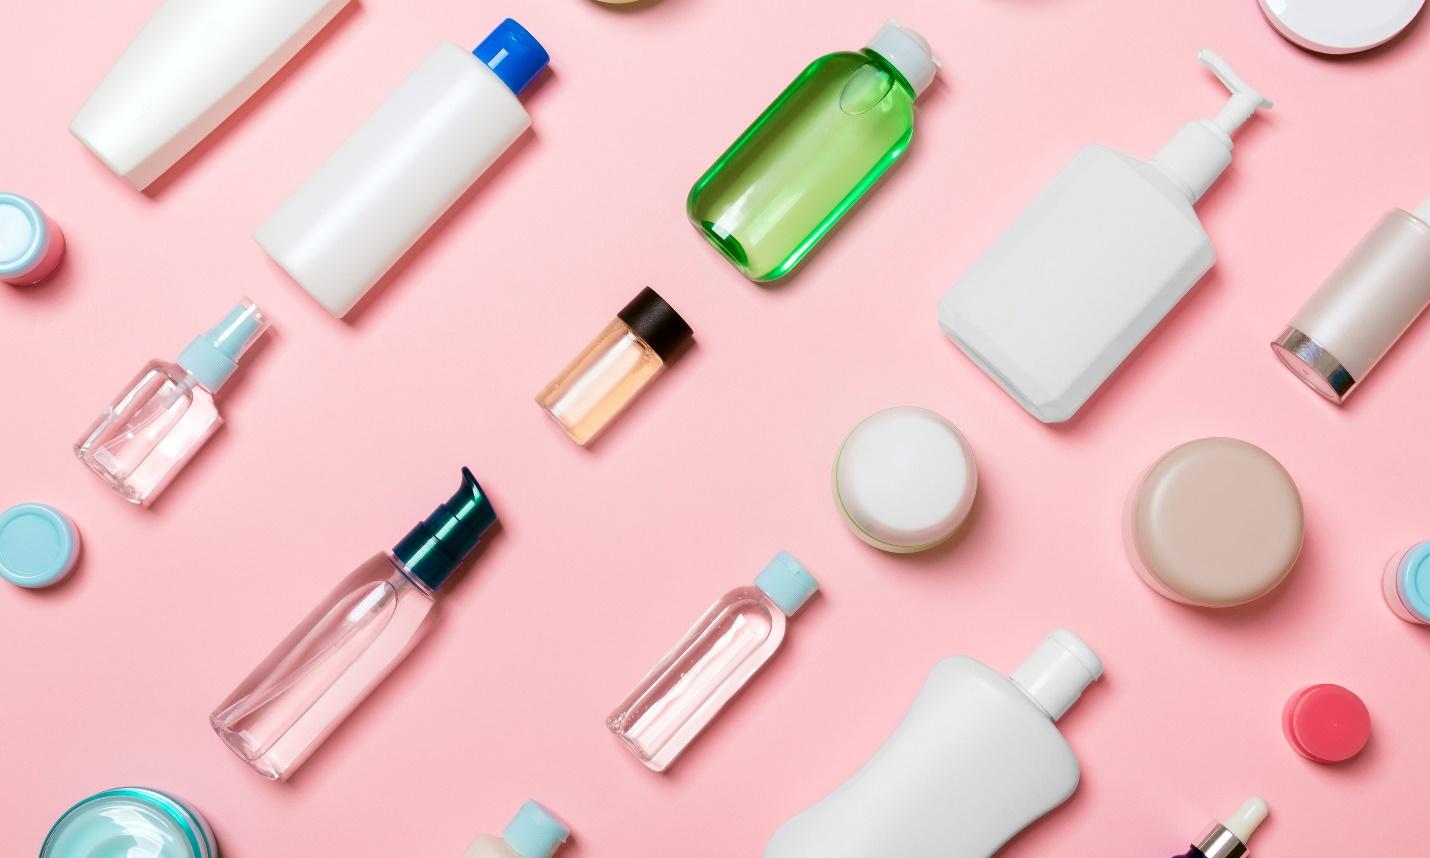 Insider’s Guide To Finding Budget-Friendly Beauty Products